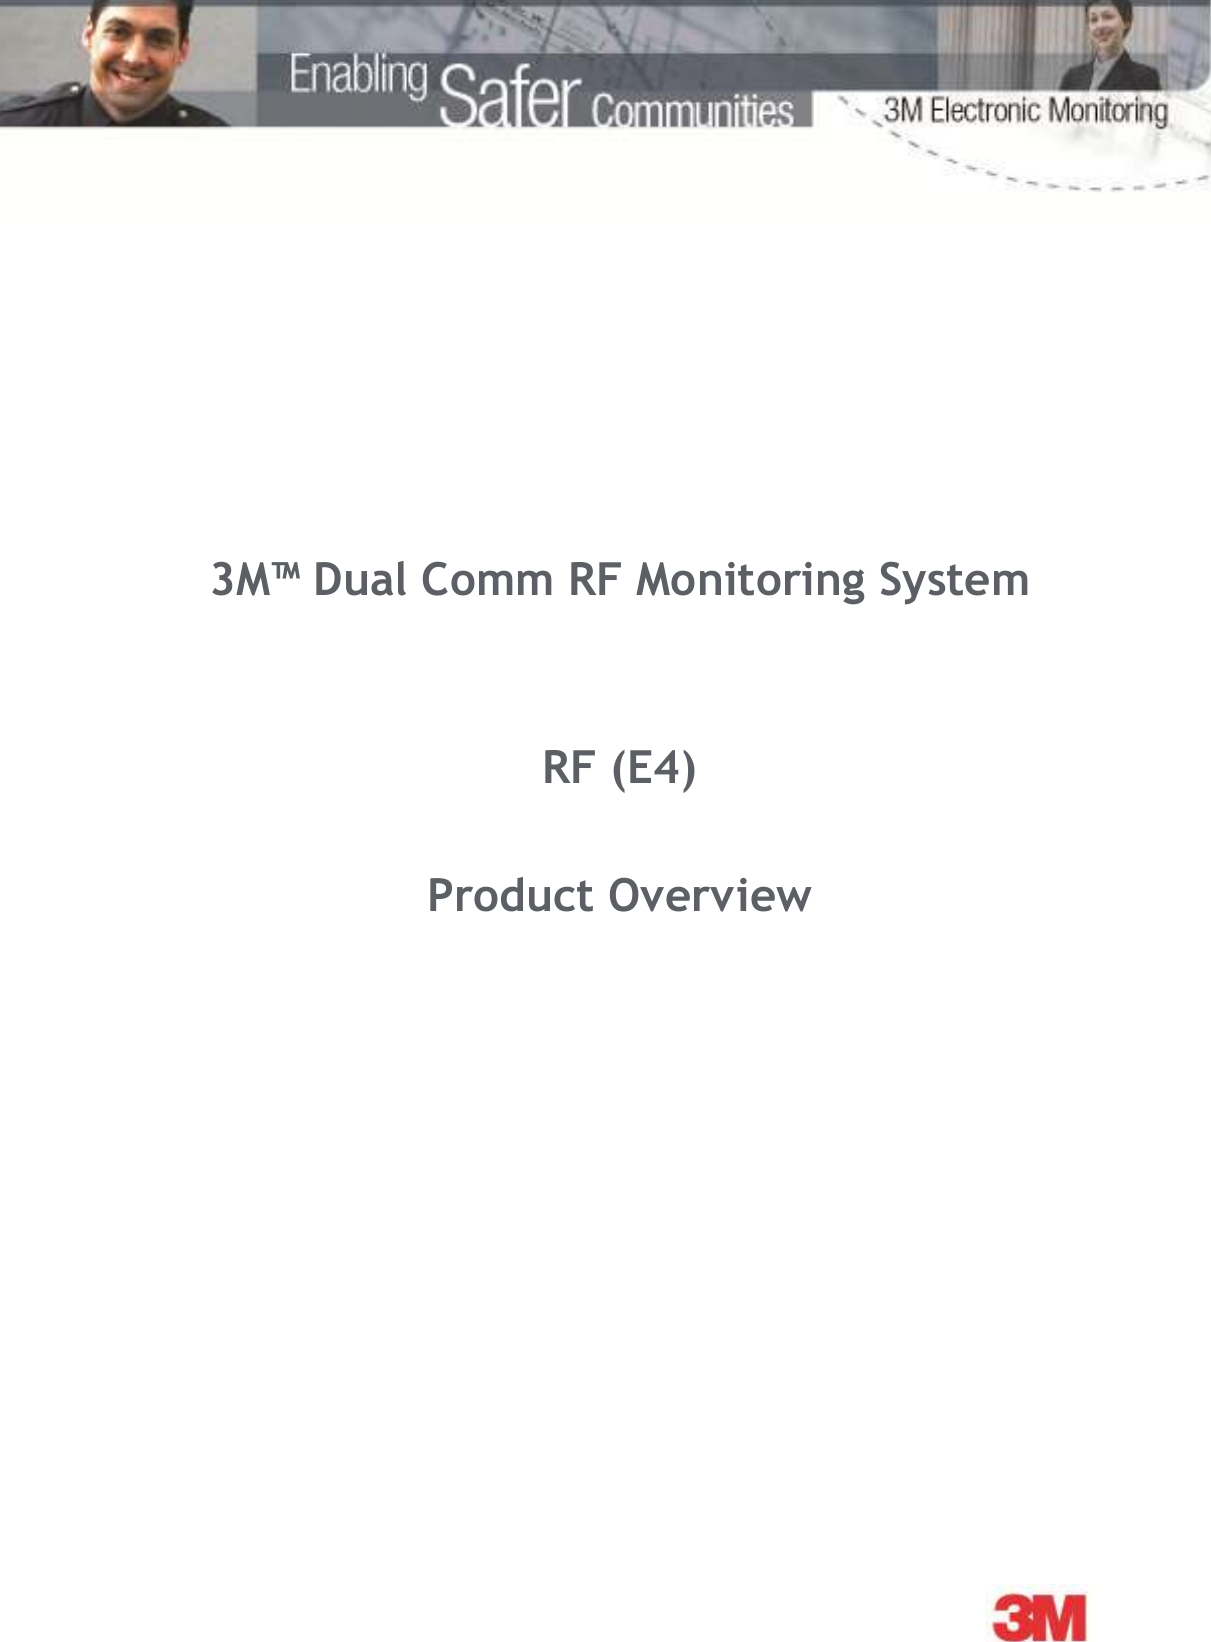          3M™ Dual Comm RF Monitoring System  RF (E4)  Product Overview 